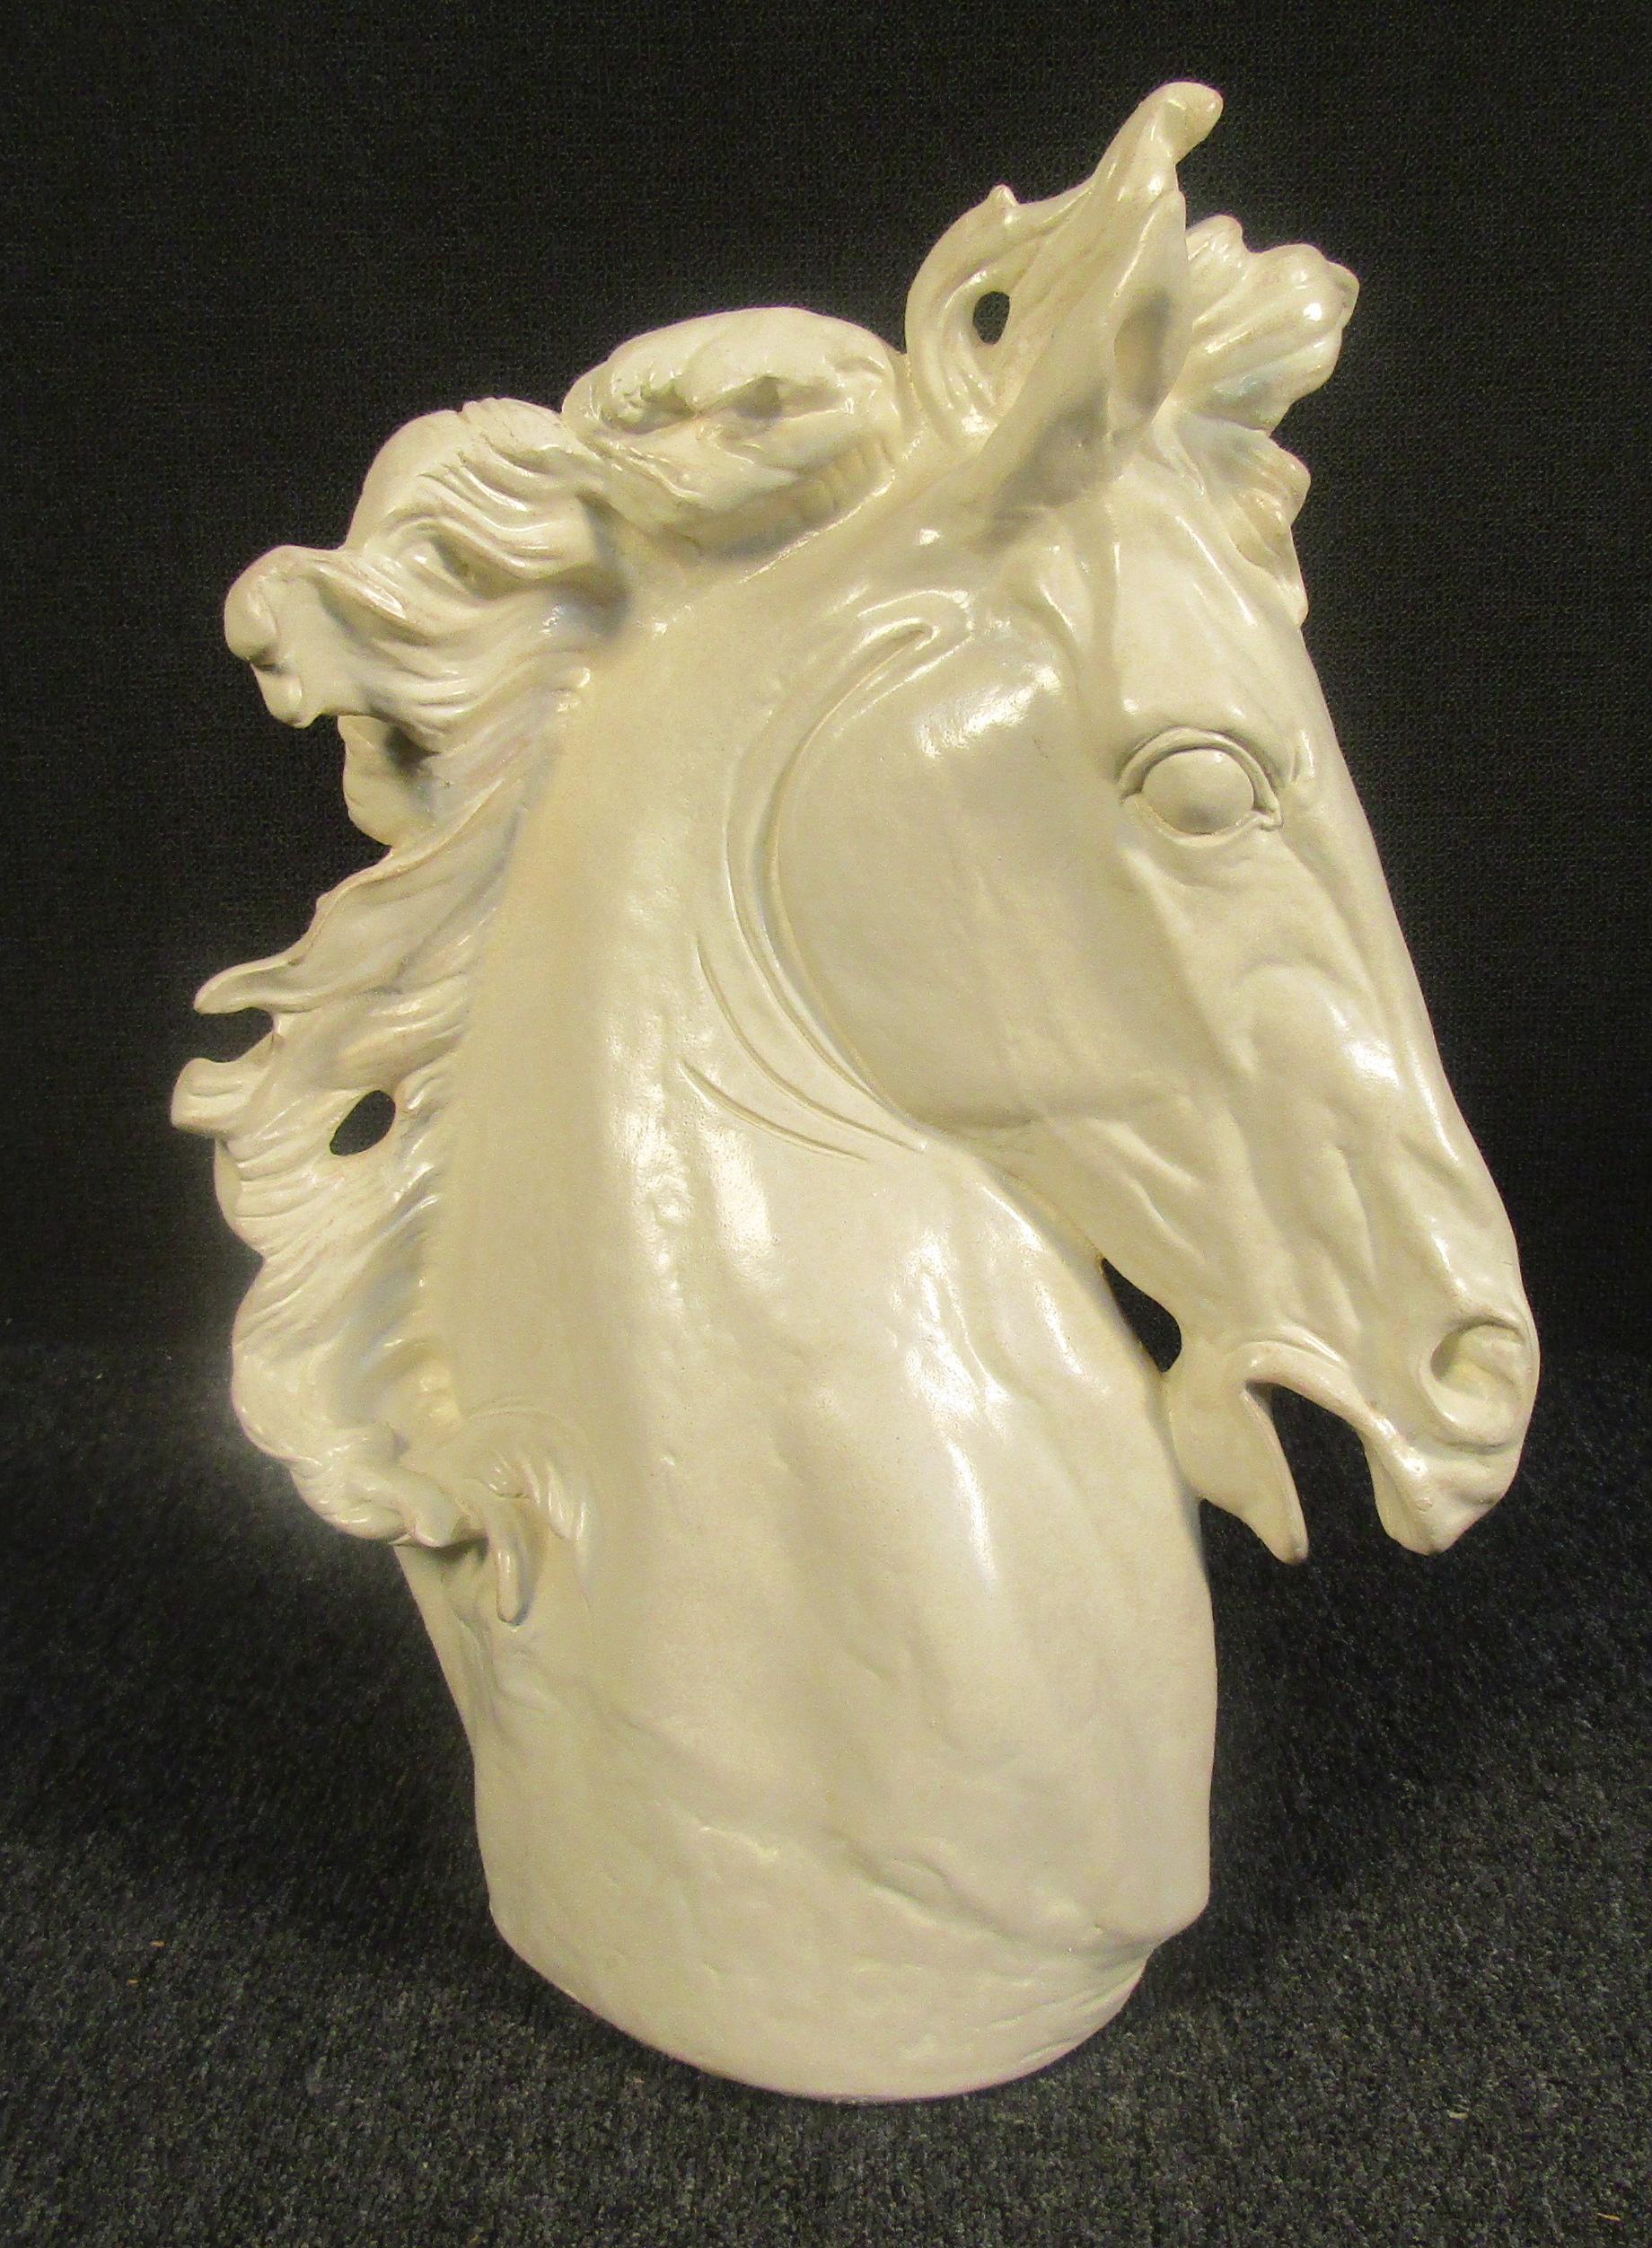 Stunning glossy white horse head sculpture. This beautiful regal piece would add sophistication and elegance to any space in your home.

Please confirm item location with seller (NY/NJ).